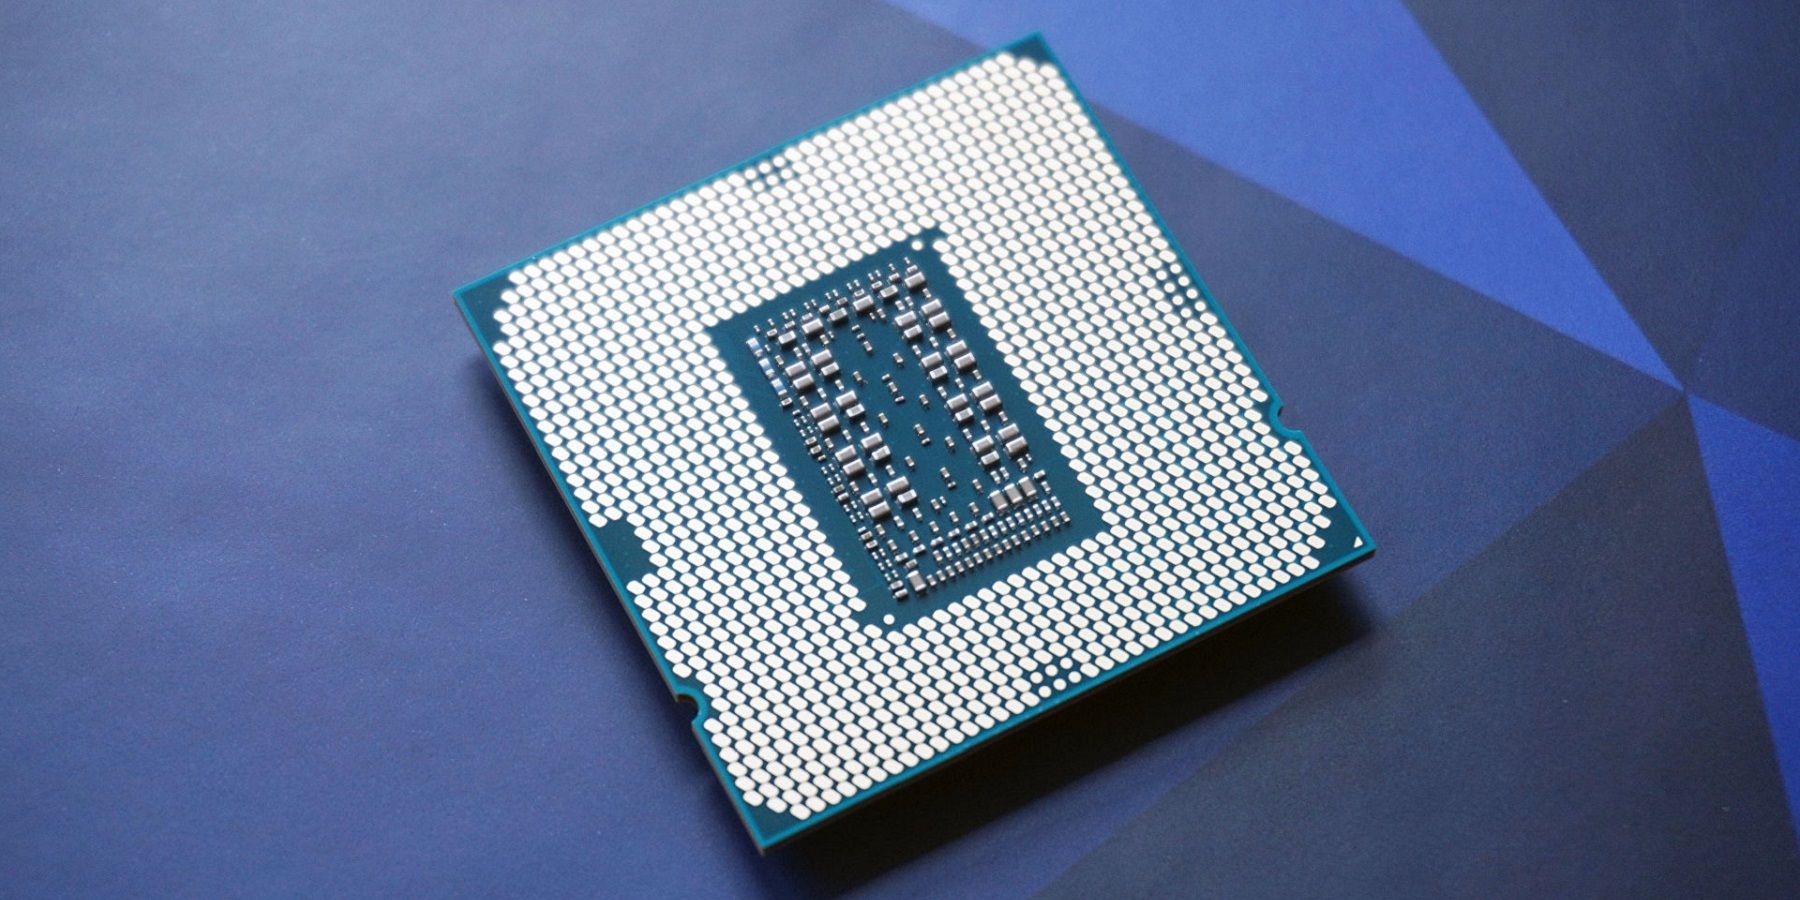 A photograph of an Intel i9 processor chip.